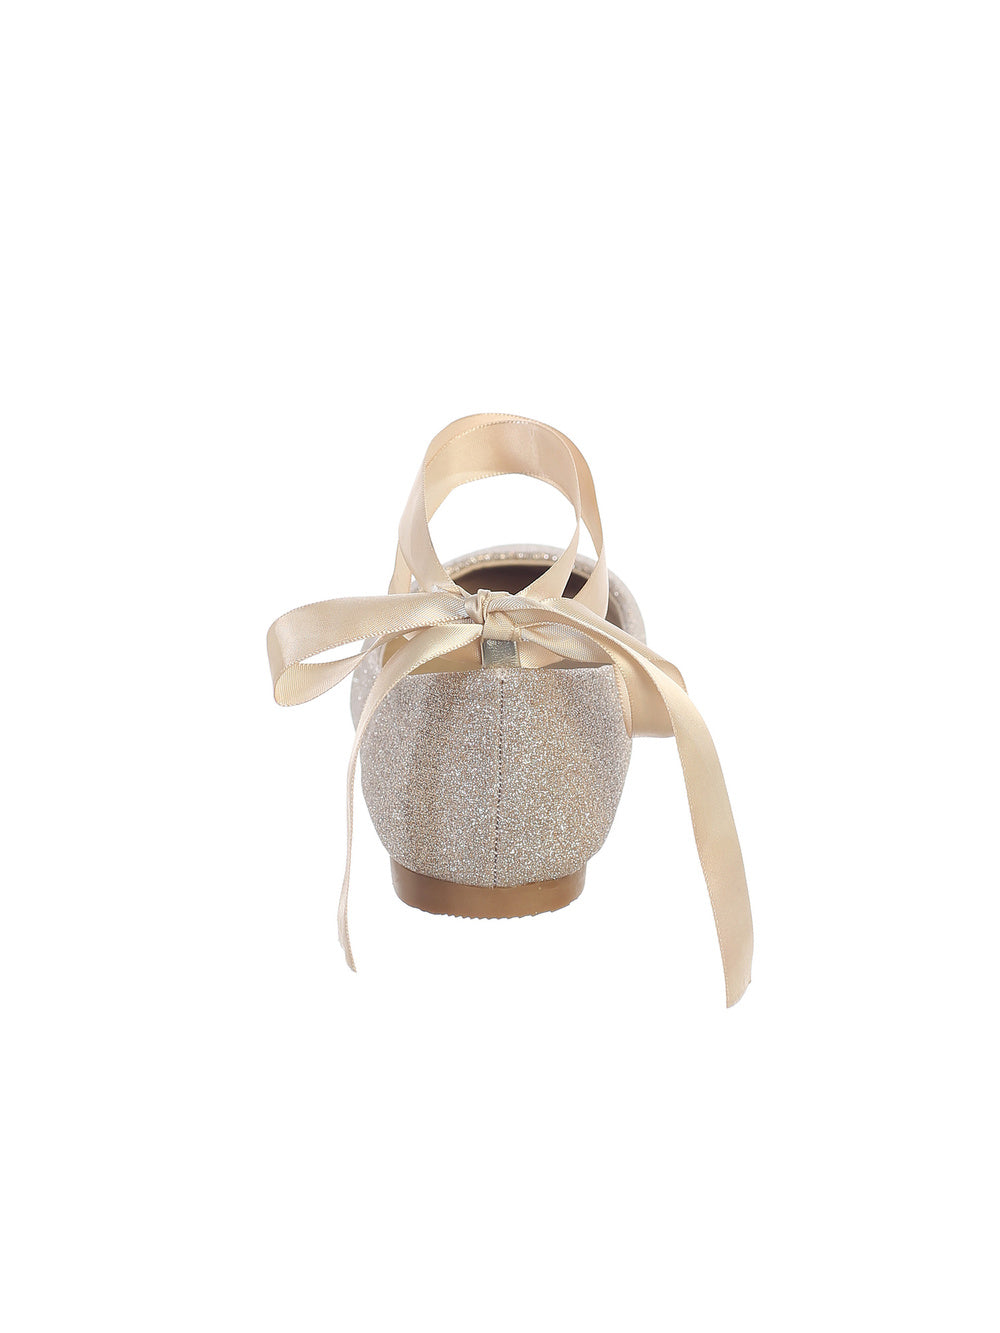 Glitter Ballerina Shoes with a Satin Ribbon Ankle Ties